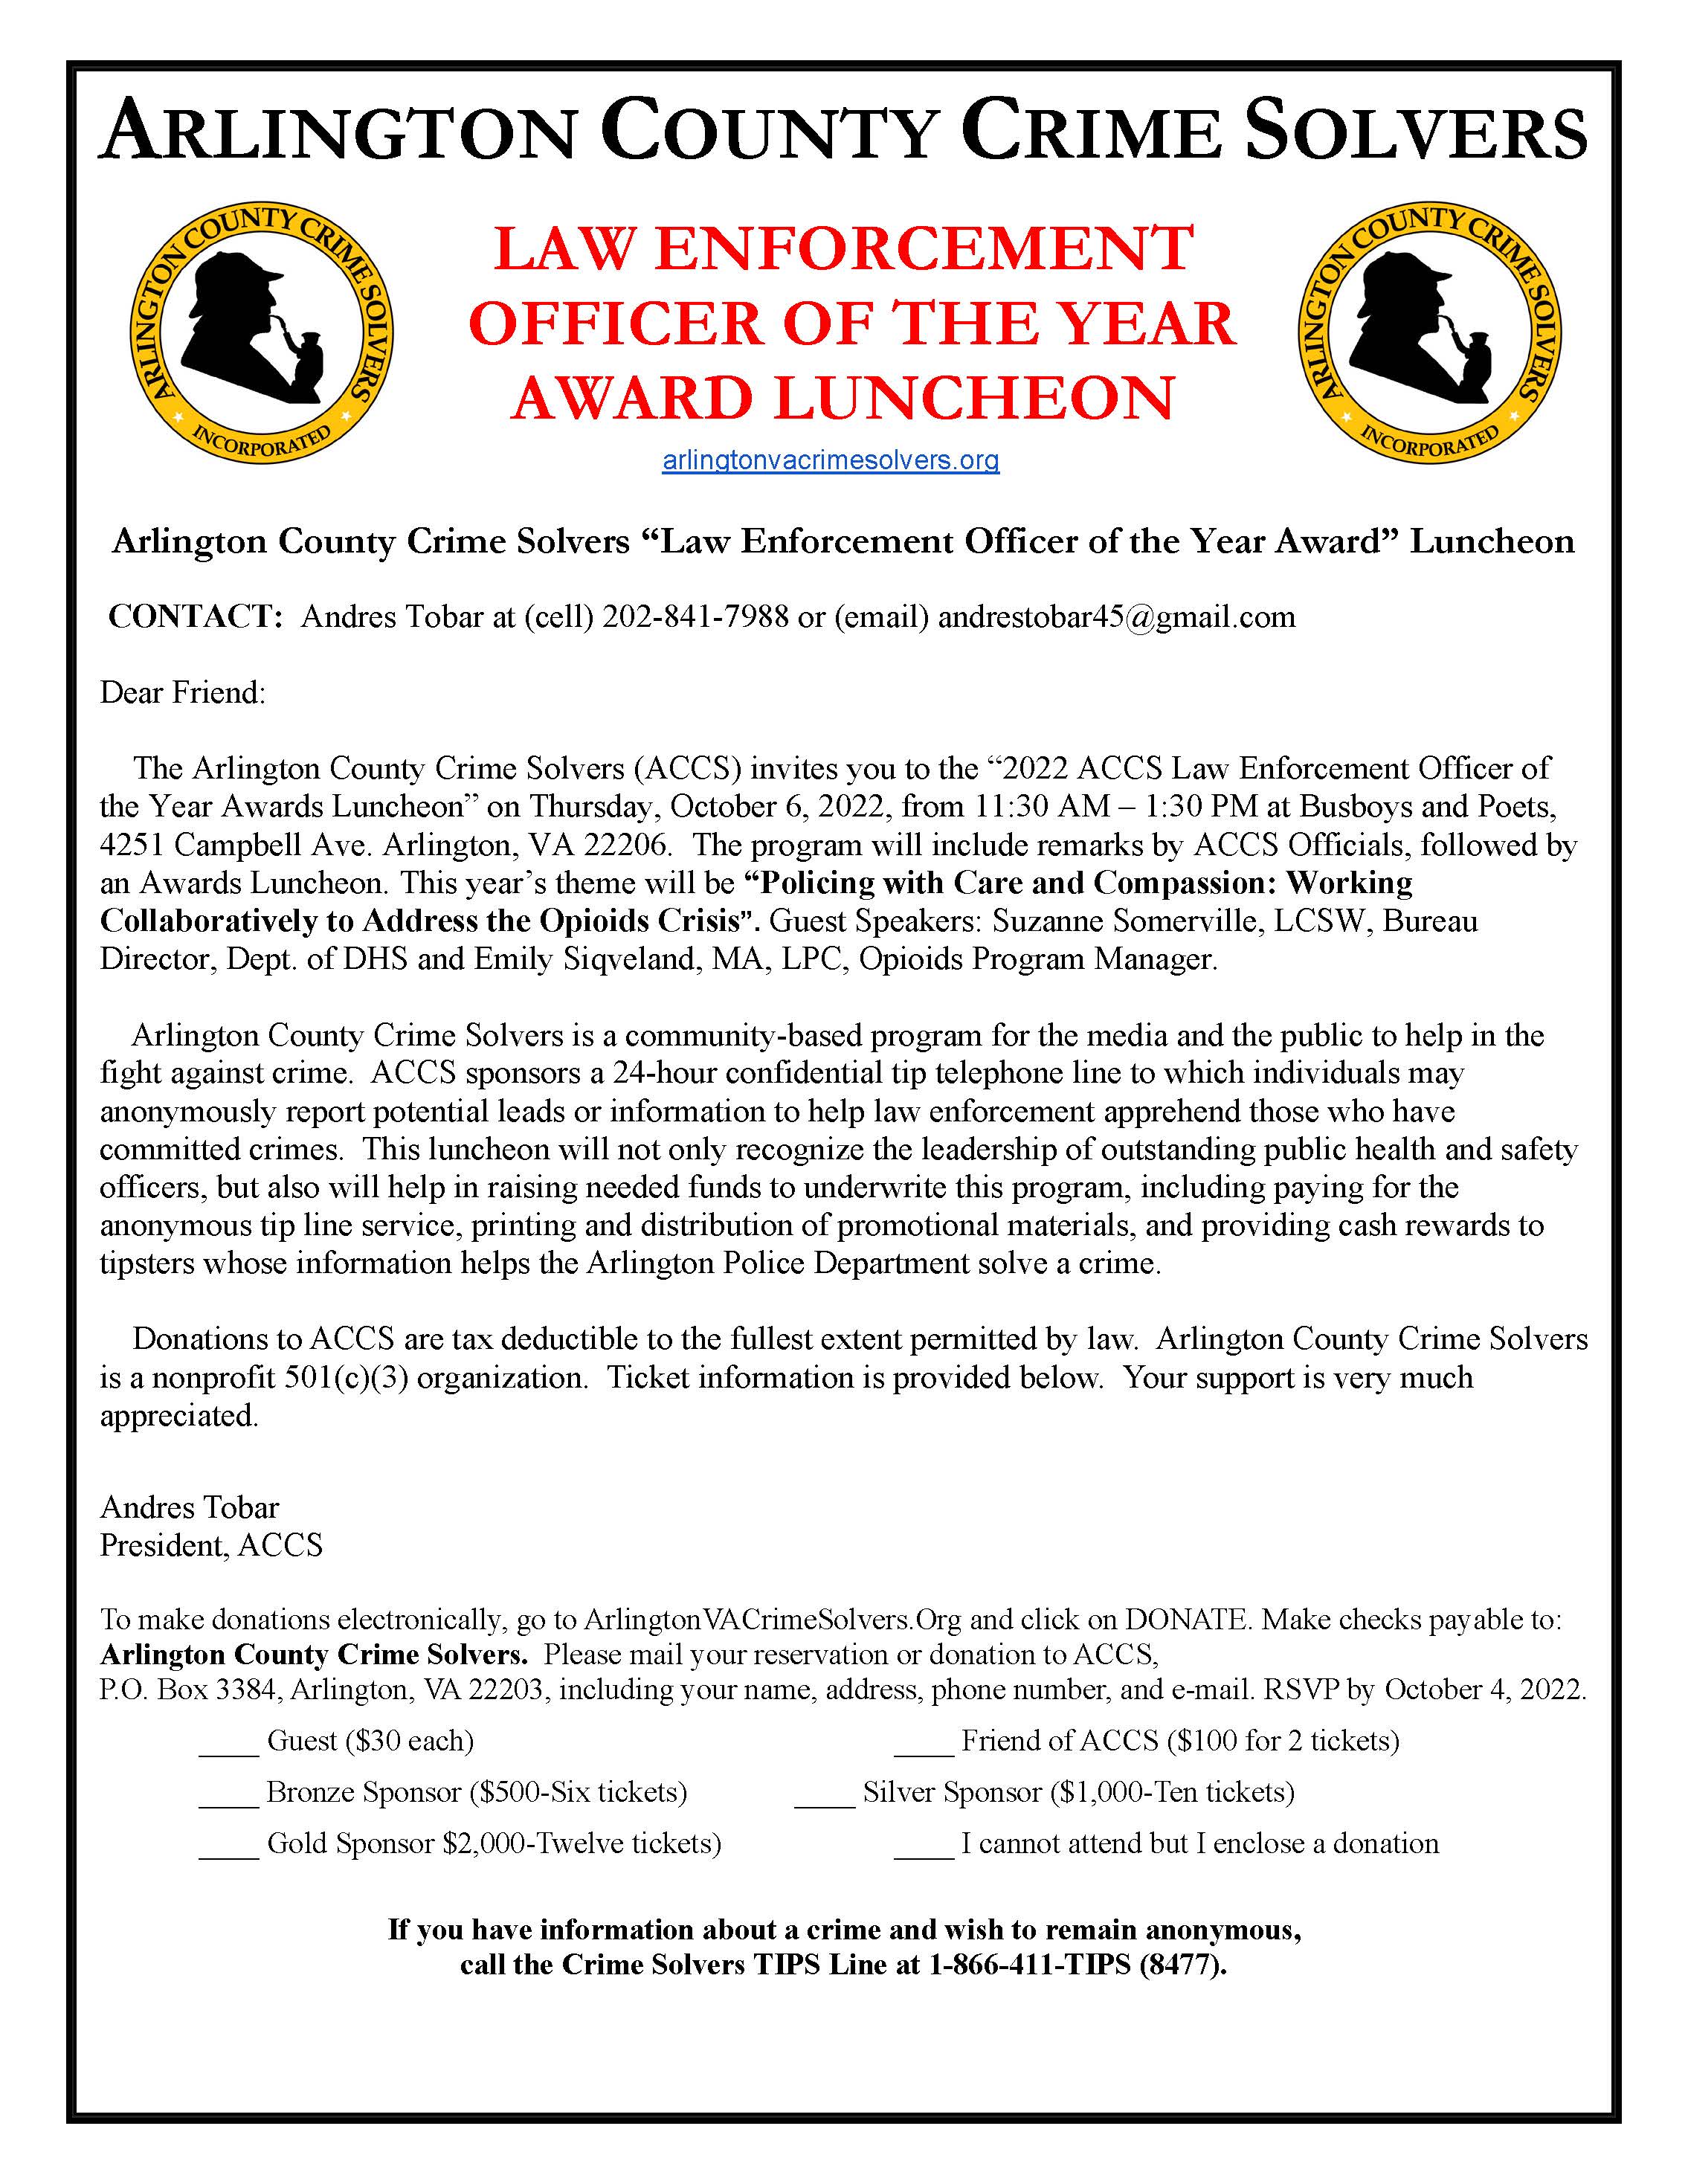 Law Enforcement Officer of the Year Award Luncheon